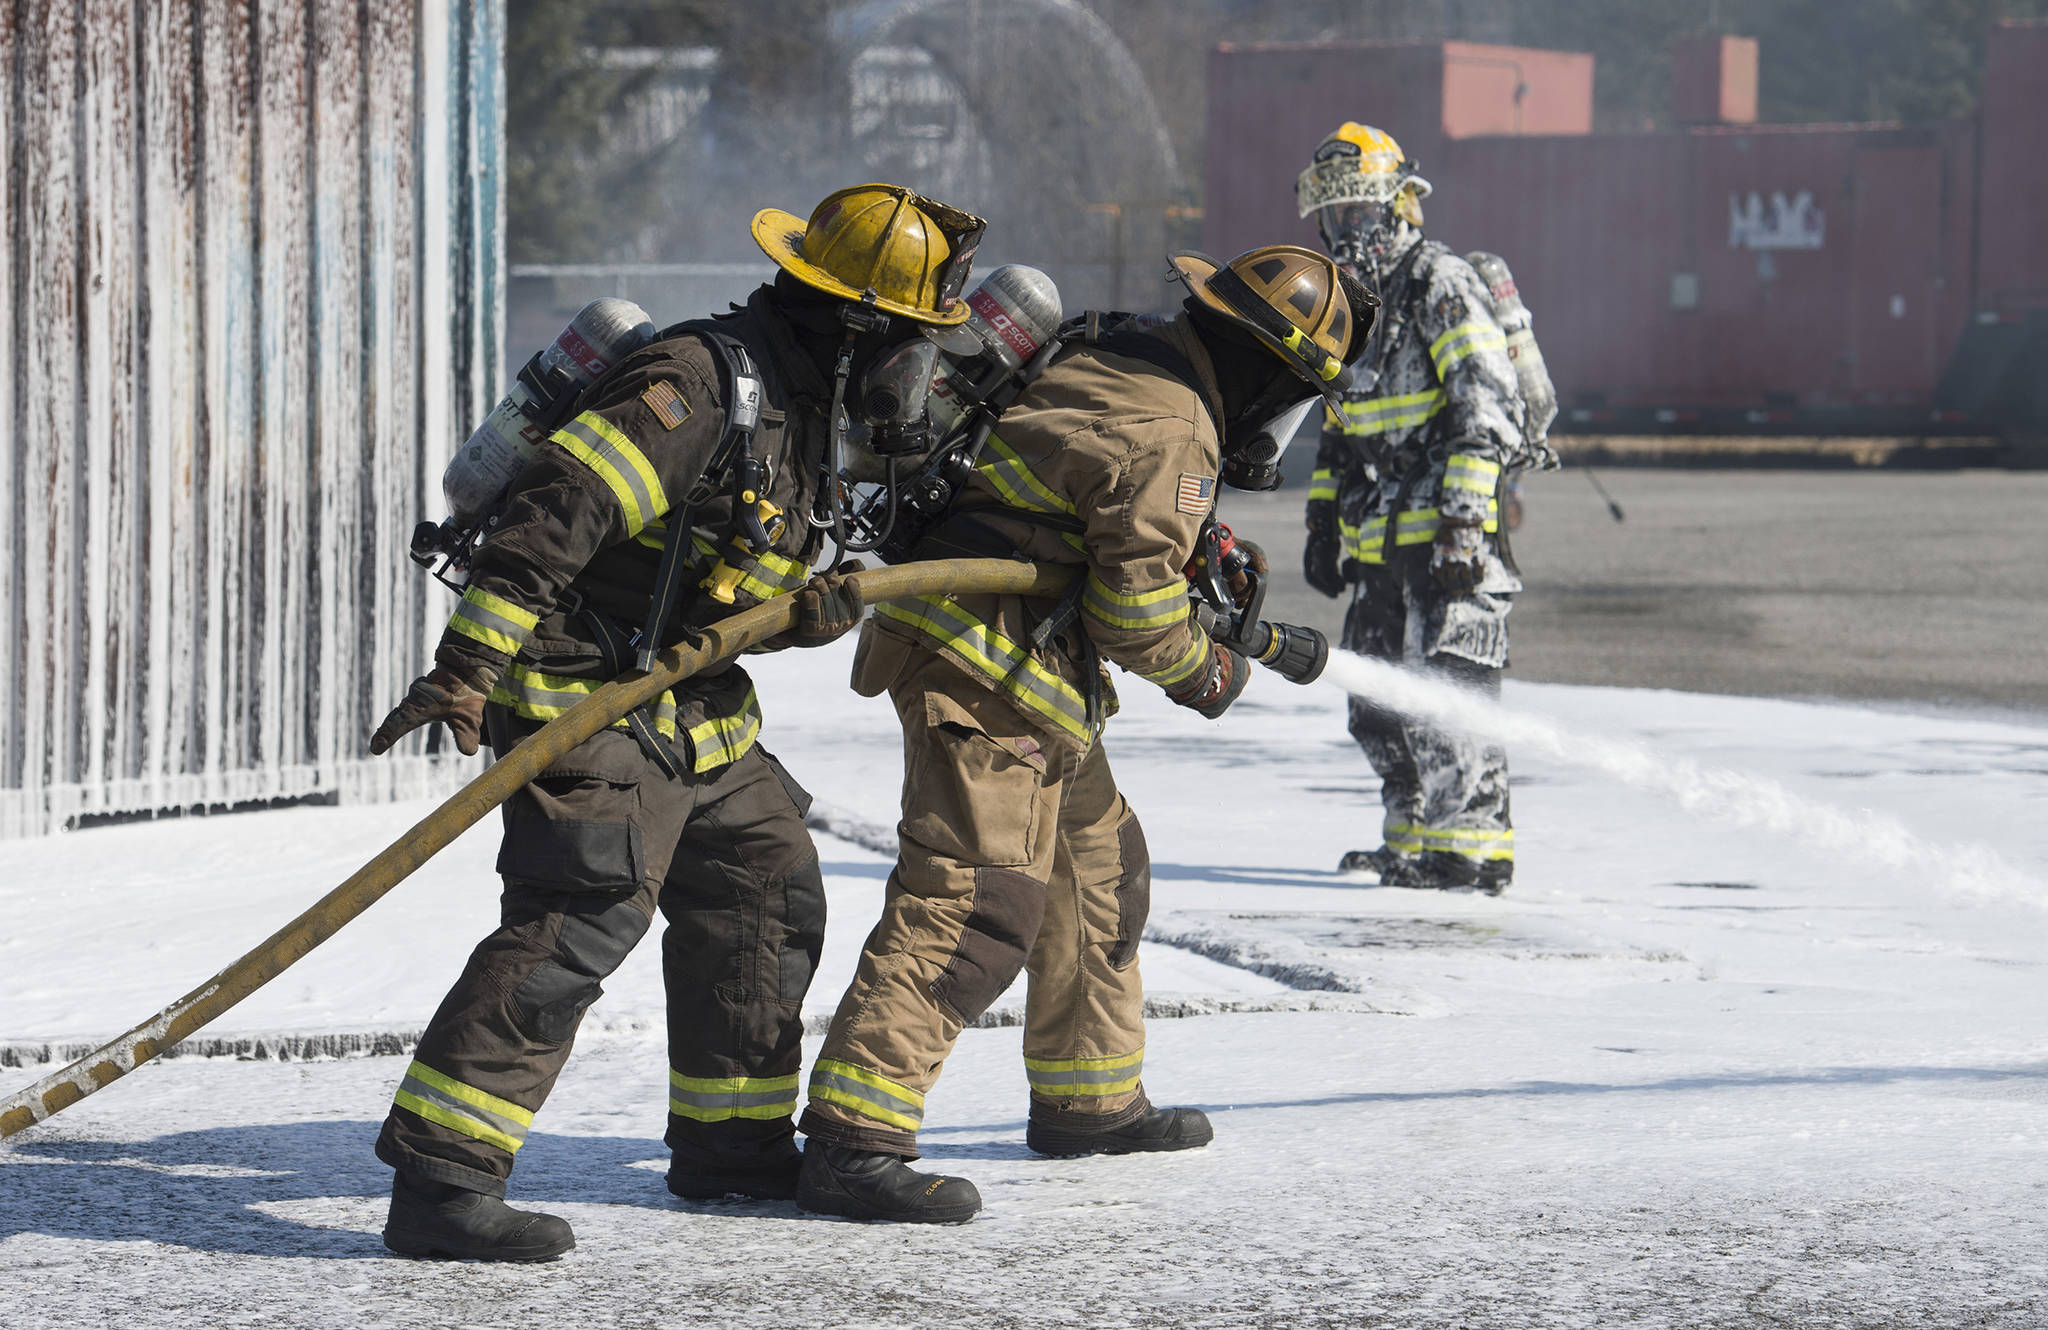 In this file photo taken April 13, 2017, Brady Fink, center, and Dave Edmunds, left, are watched by Engineer Lance Lawhorne as they update their airport rescue firefighting skills at the Hagevig Regional Fire Training Center. A potentially harmful chemical was detected at the center after soil and water testing at the center. (Michael Penn | Juneau Empire File)